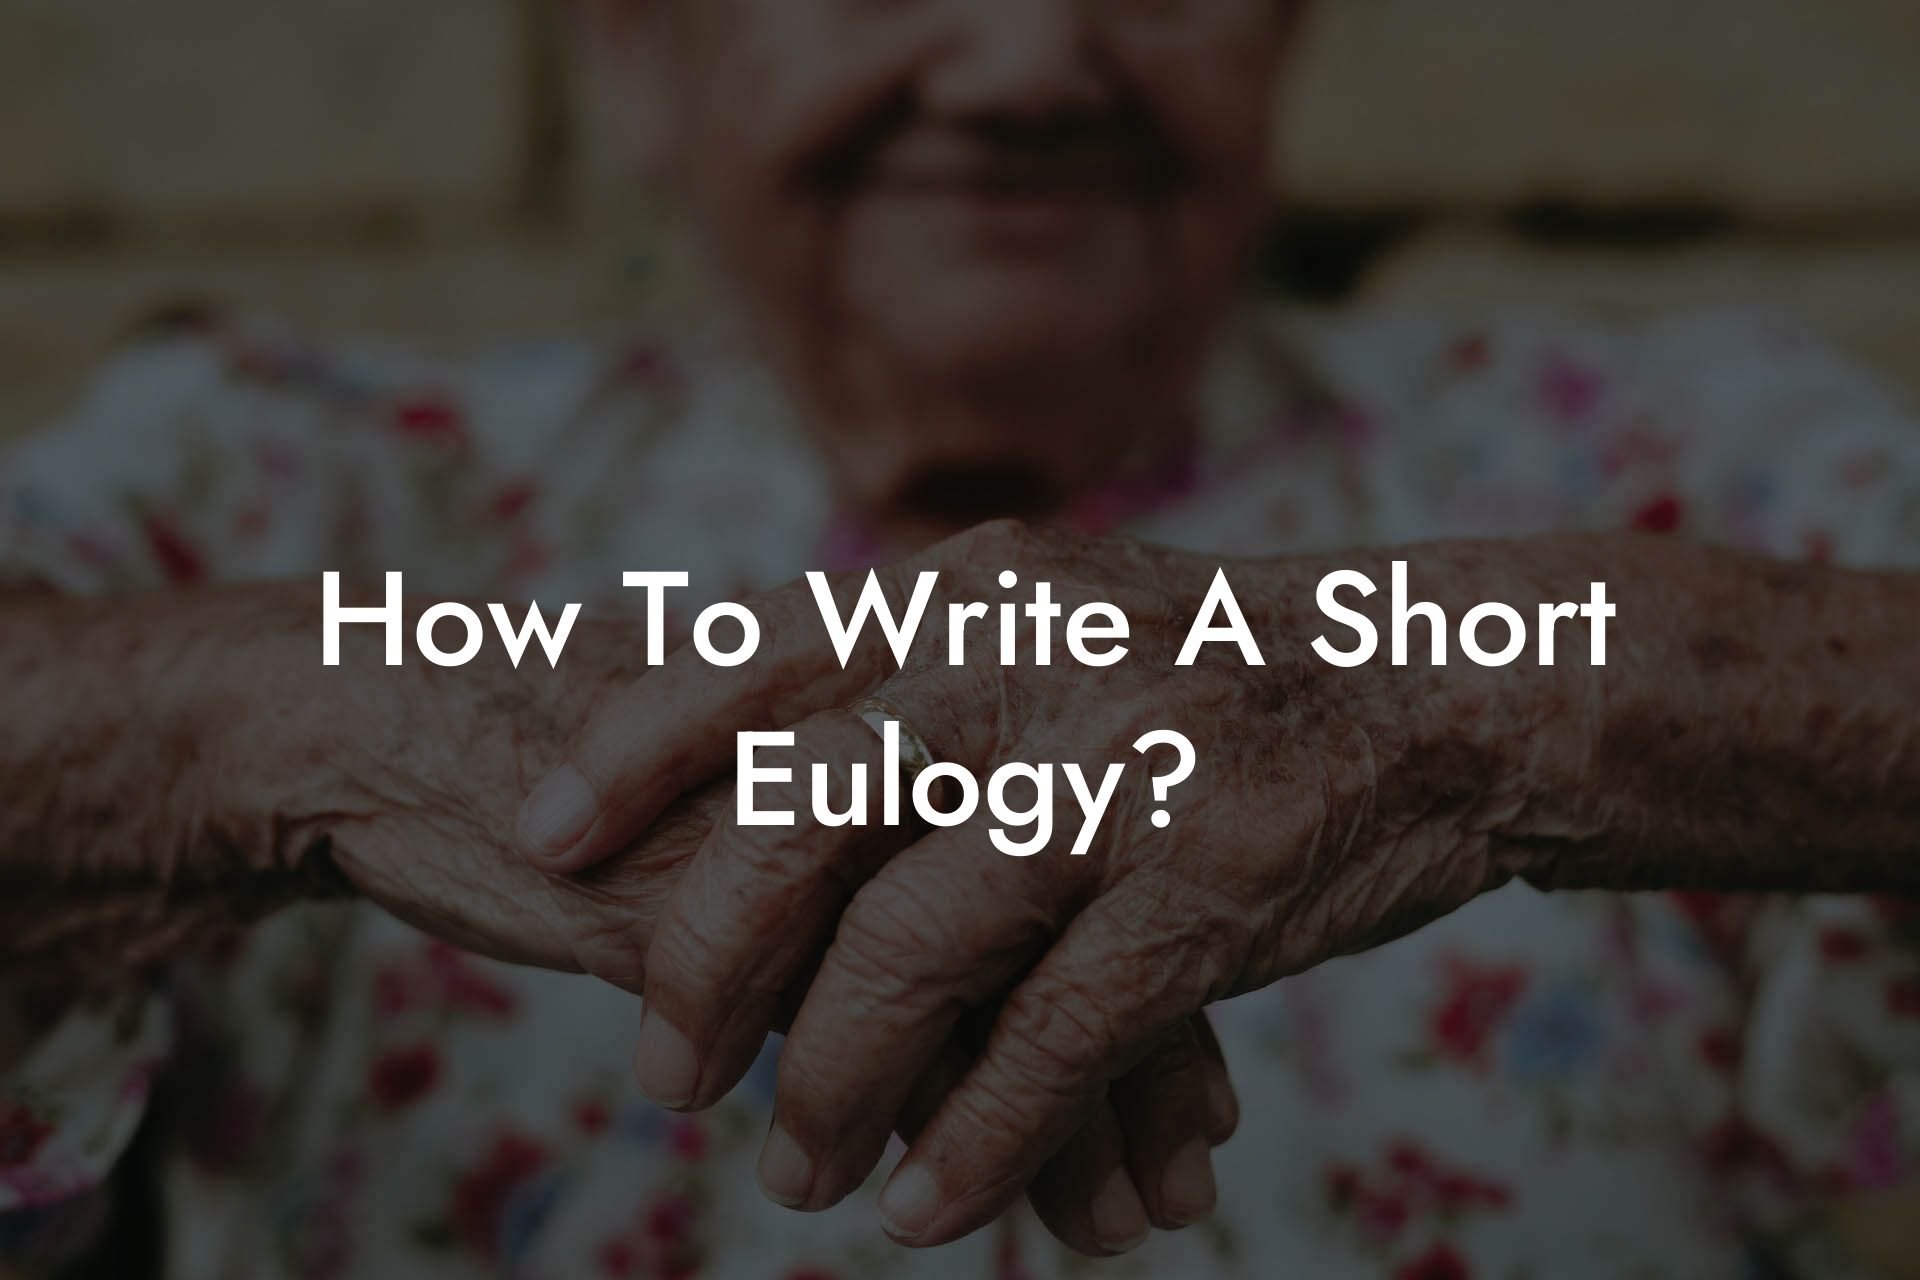 How To Write A Short Eulogy?